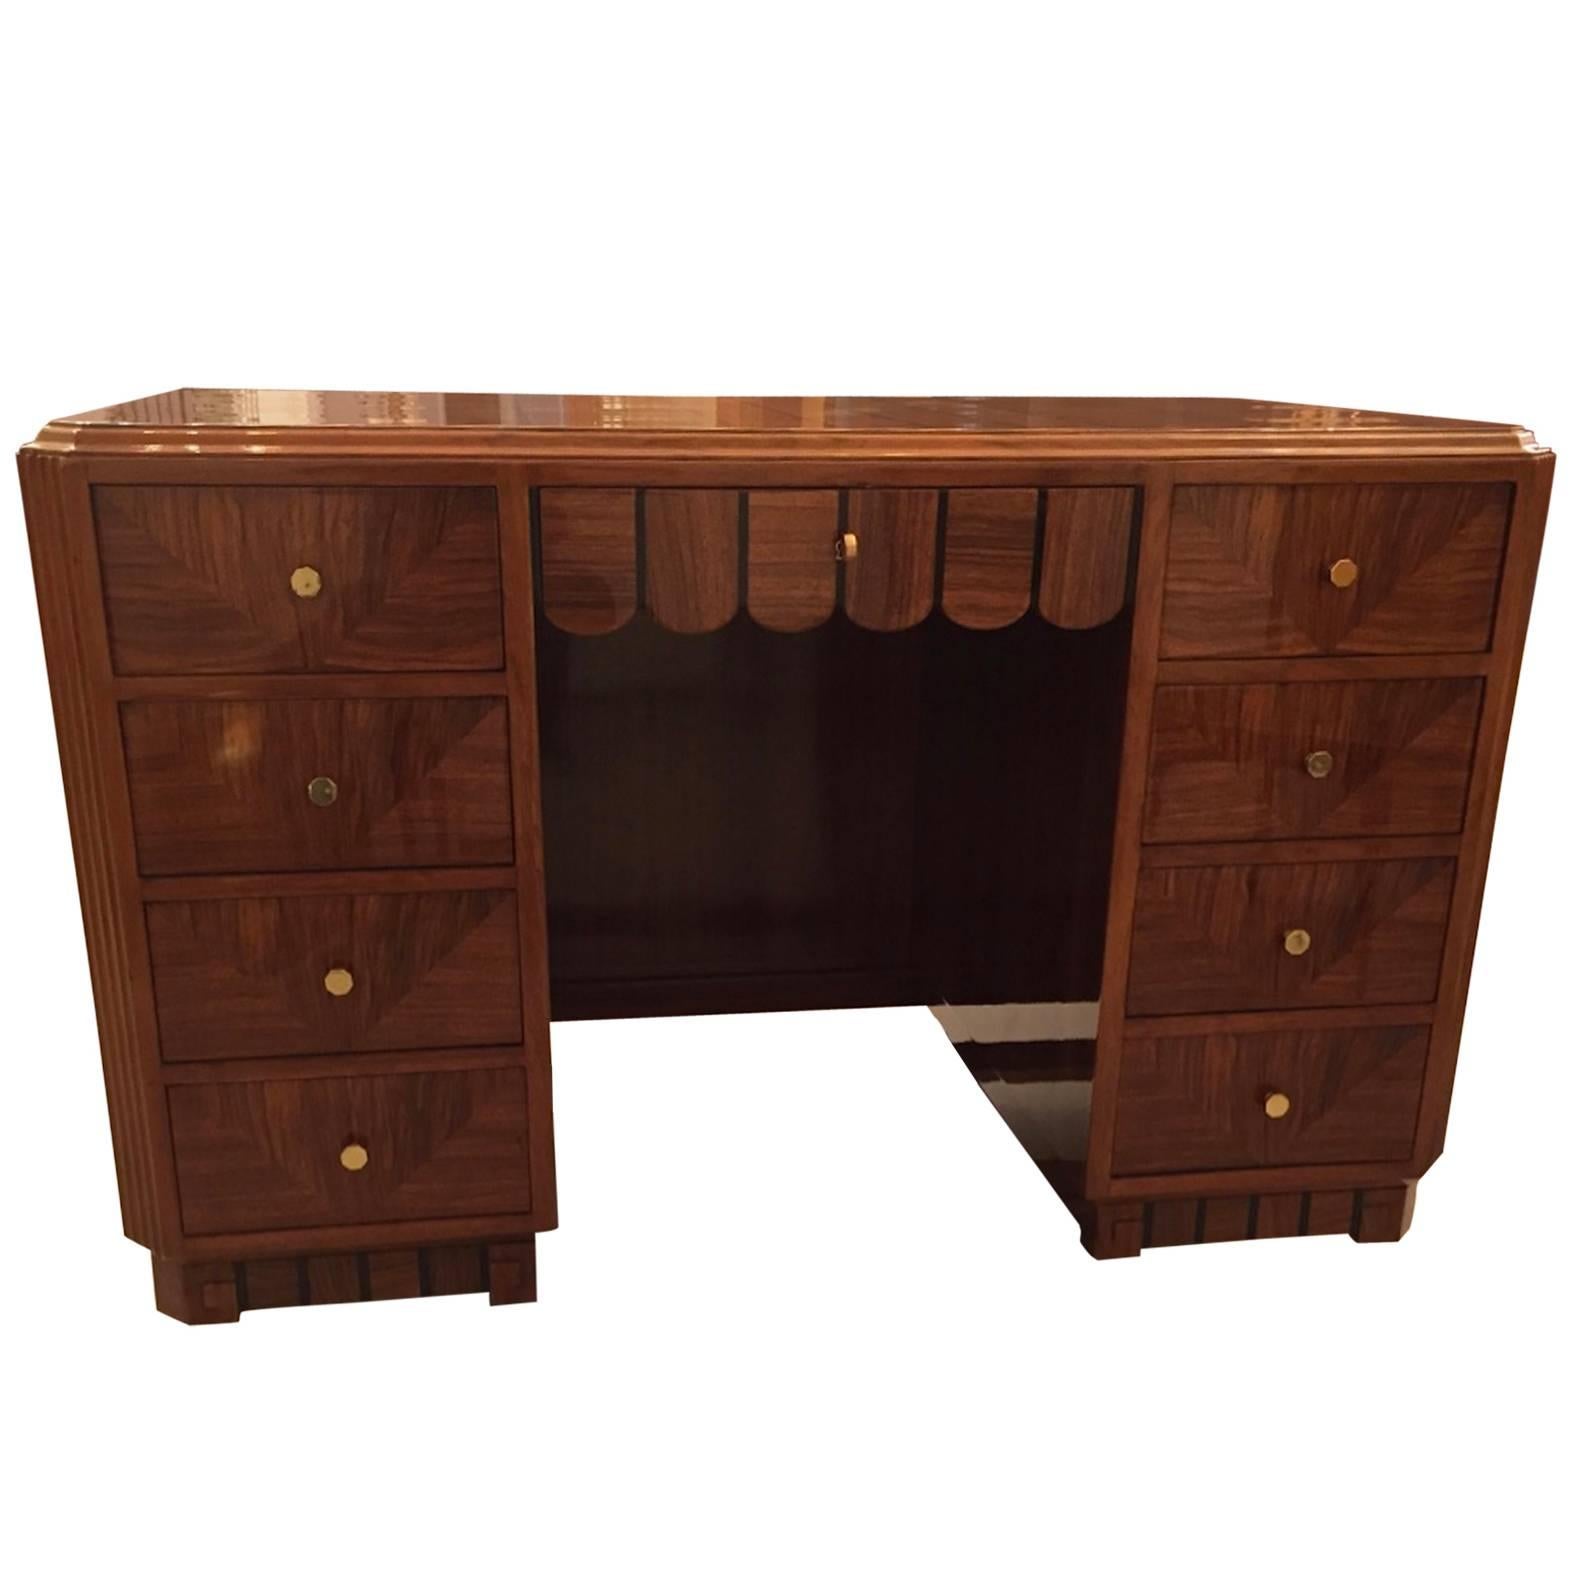 Impressive French Art Deco Desk with Secretary Table For Sale